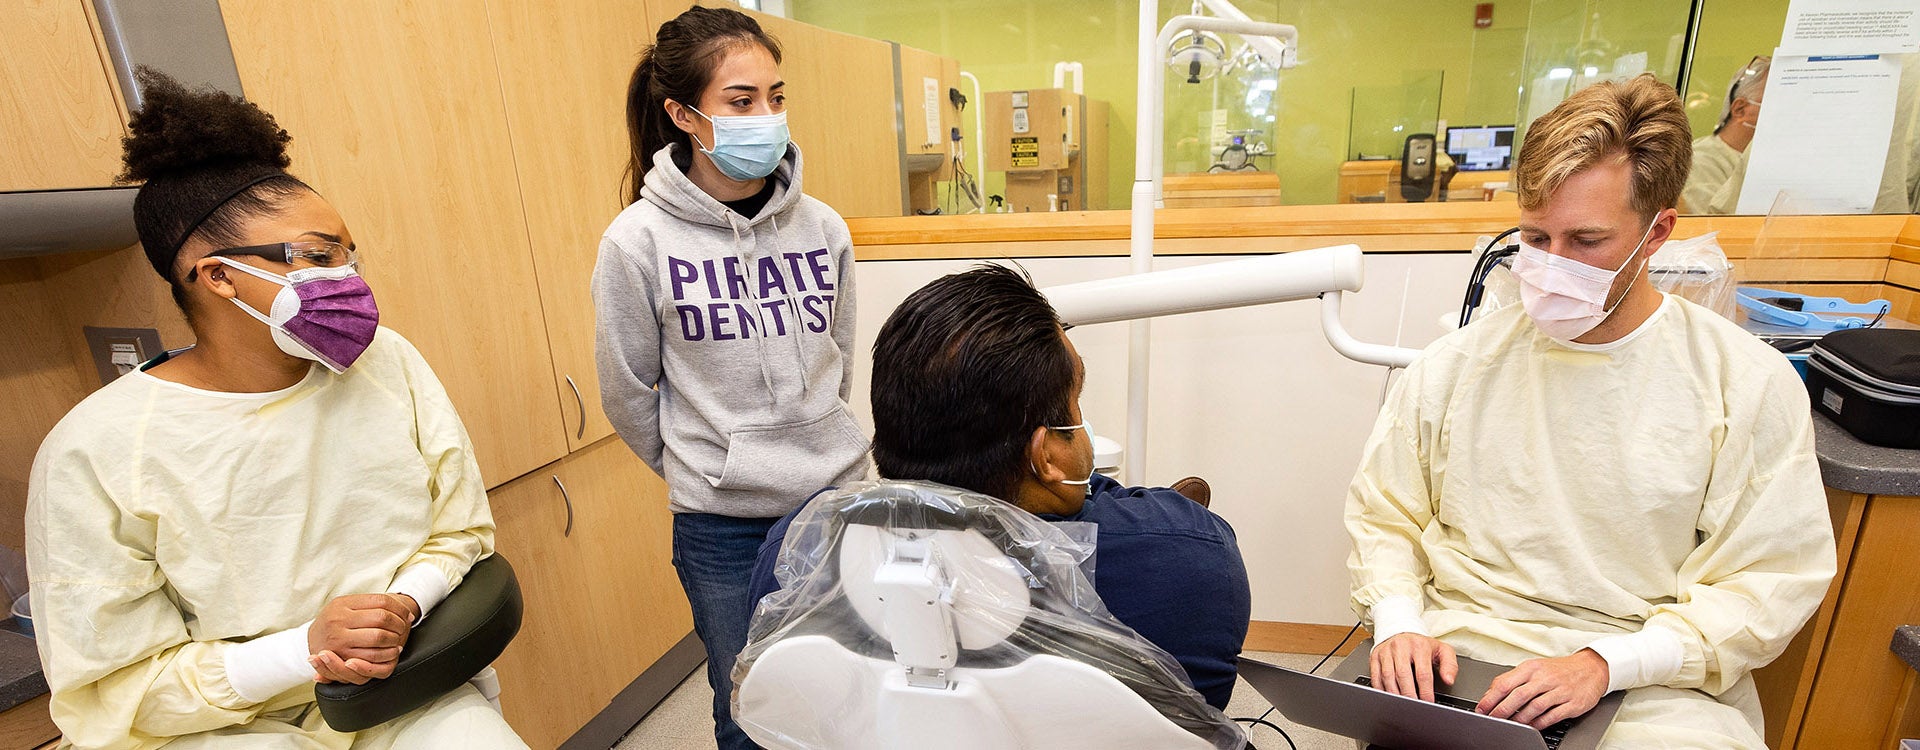 The School of Dental Medicine offers programs and events geared toward providing oral health care for special populations, including veterans, migrant farmworkers, special needs patients and schoolchildren.